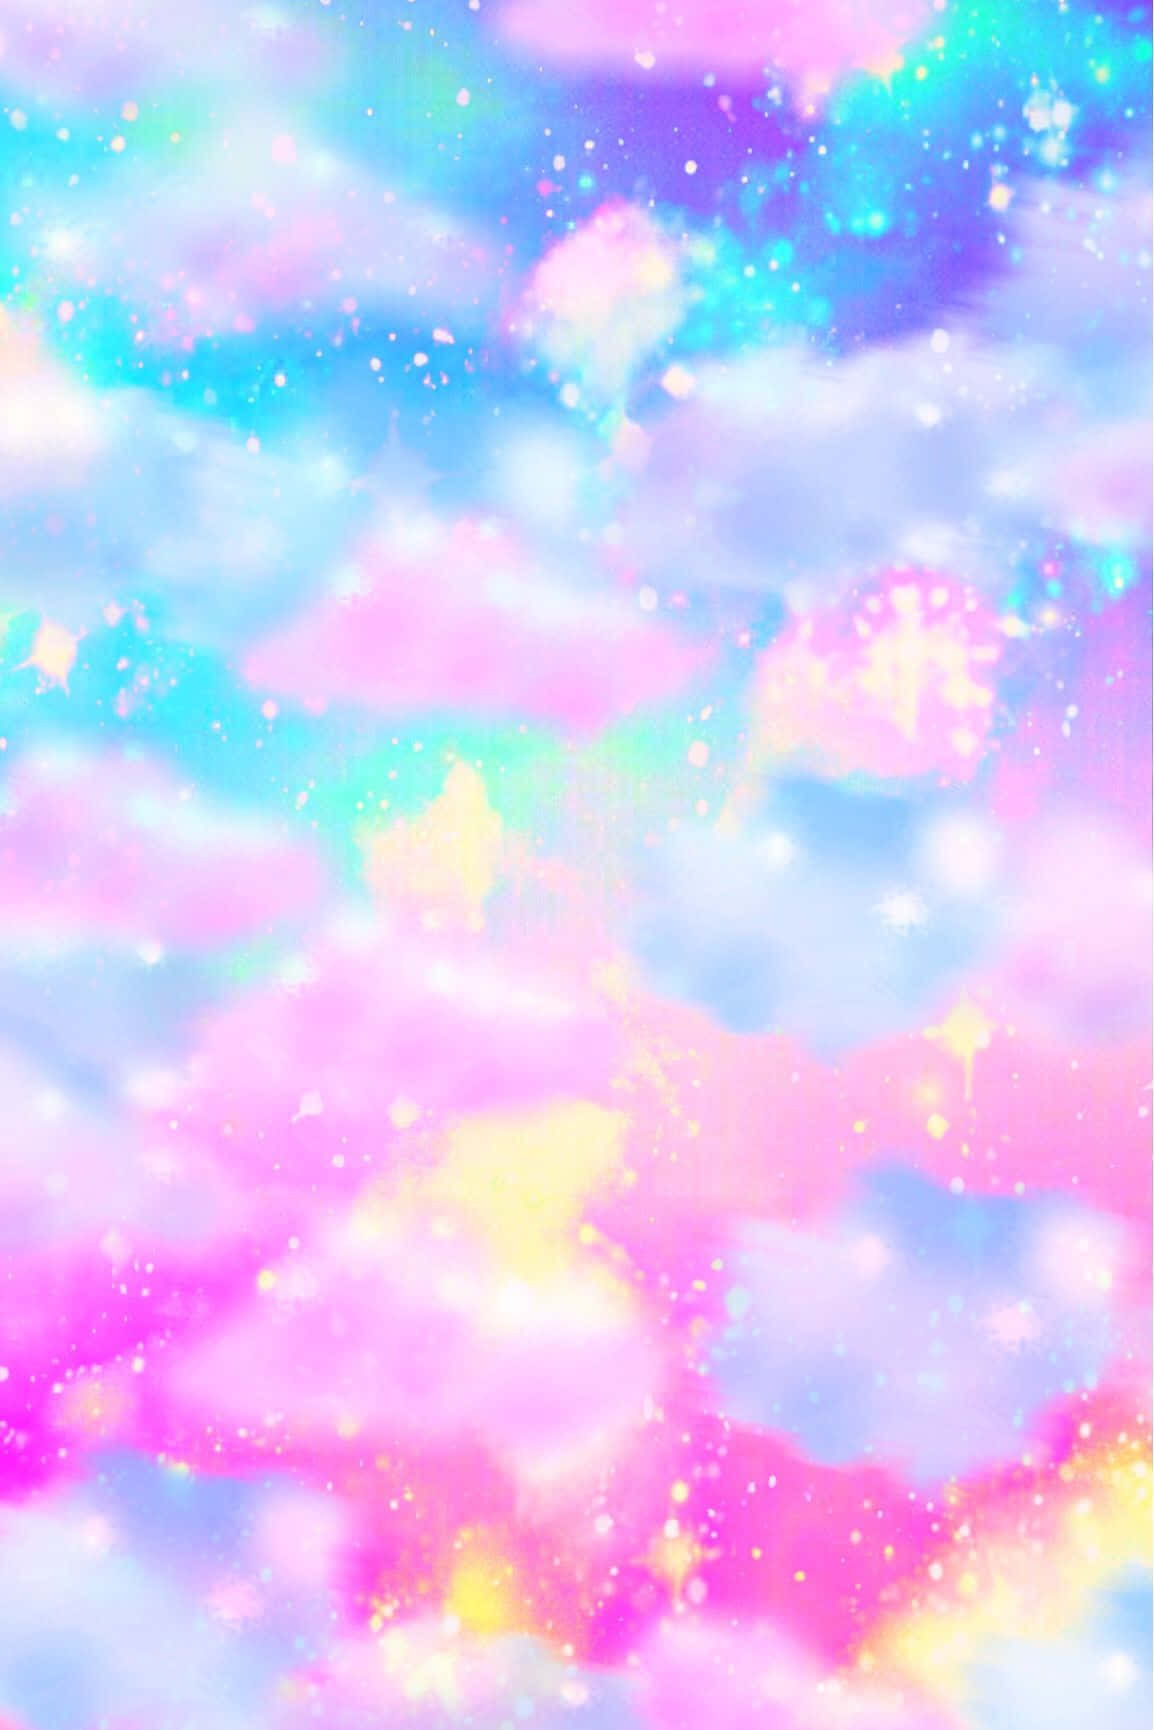 Download A Pink And Blue Sky With Stars And Clouds Wallpaper ...